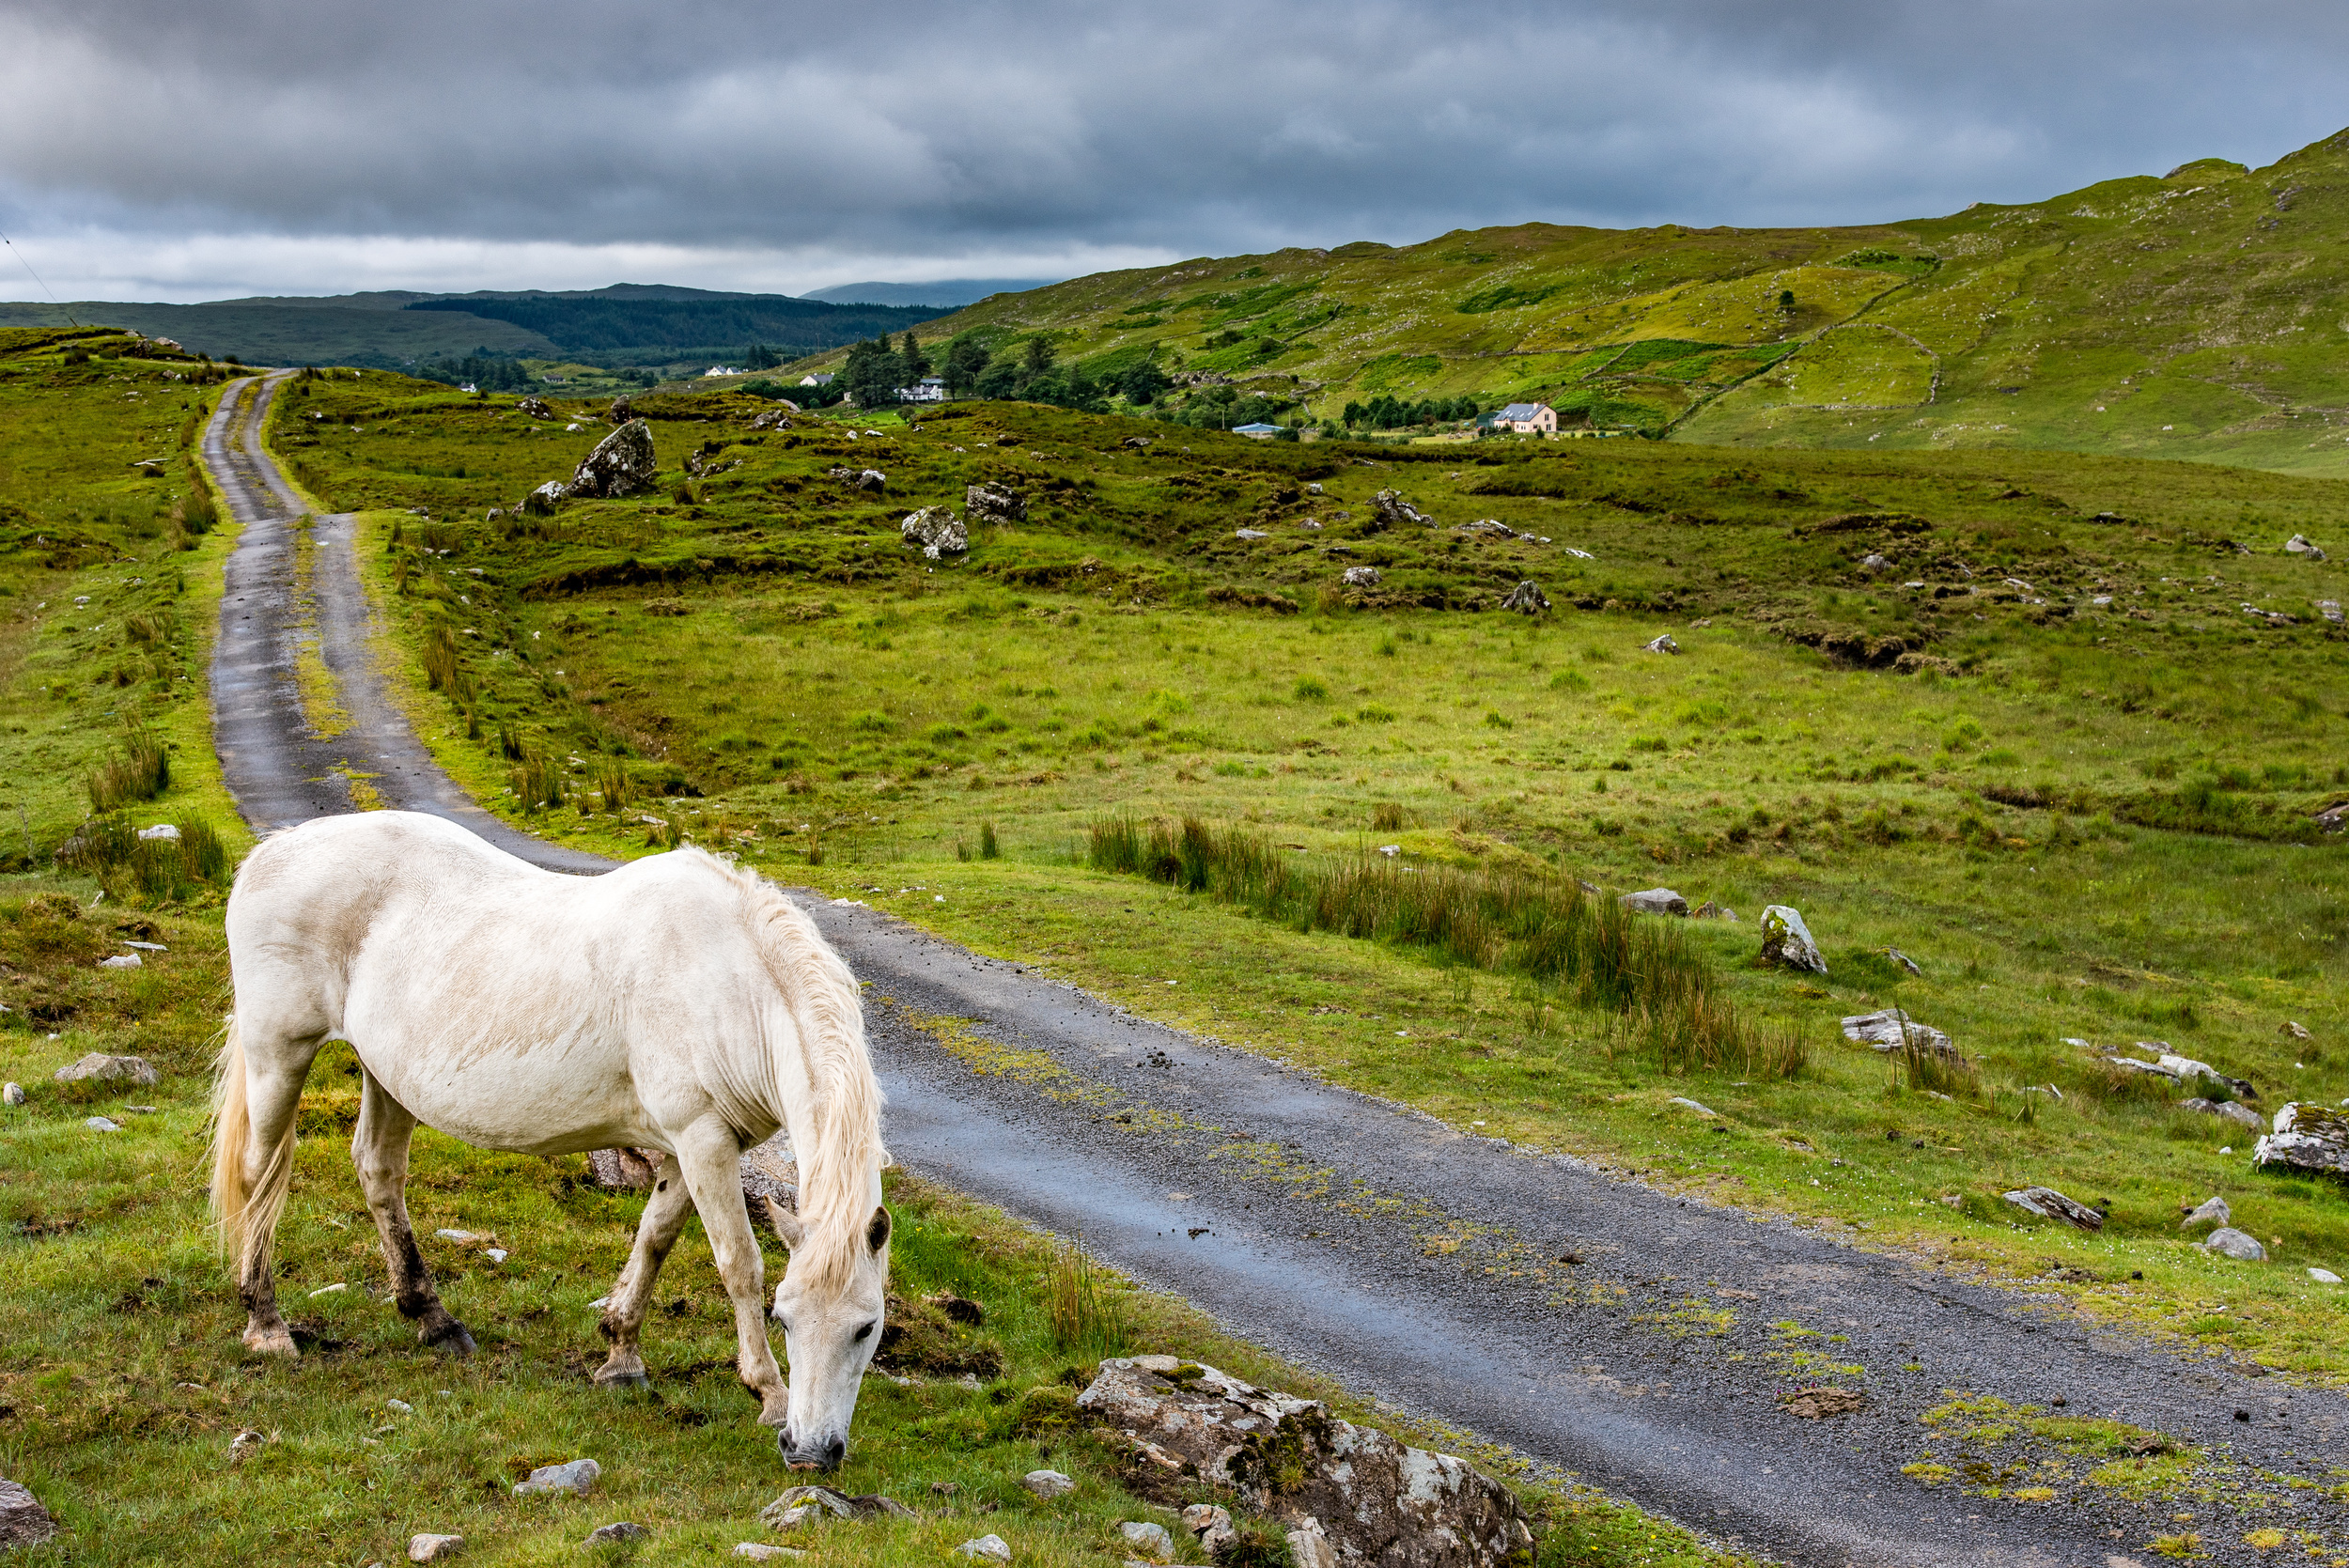 <p>The Emerald Isle is most famous for the native Connemara ponies, with their distinctive long manes and versatility. The breed originates from the country's west coast but can be found around the island, especially if you join one of Ireland’s national pastimes, fox hunting, on your visit.</p><p>You may also like: <a href='https://www.yardbarker.com/lifestyle/articles/20_tips_that_will_keep_your_chicken_moist_on_the_grill_121923/s1__24181486'>20 tips that will keep your chicken moist on the grill</a></p>